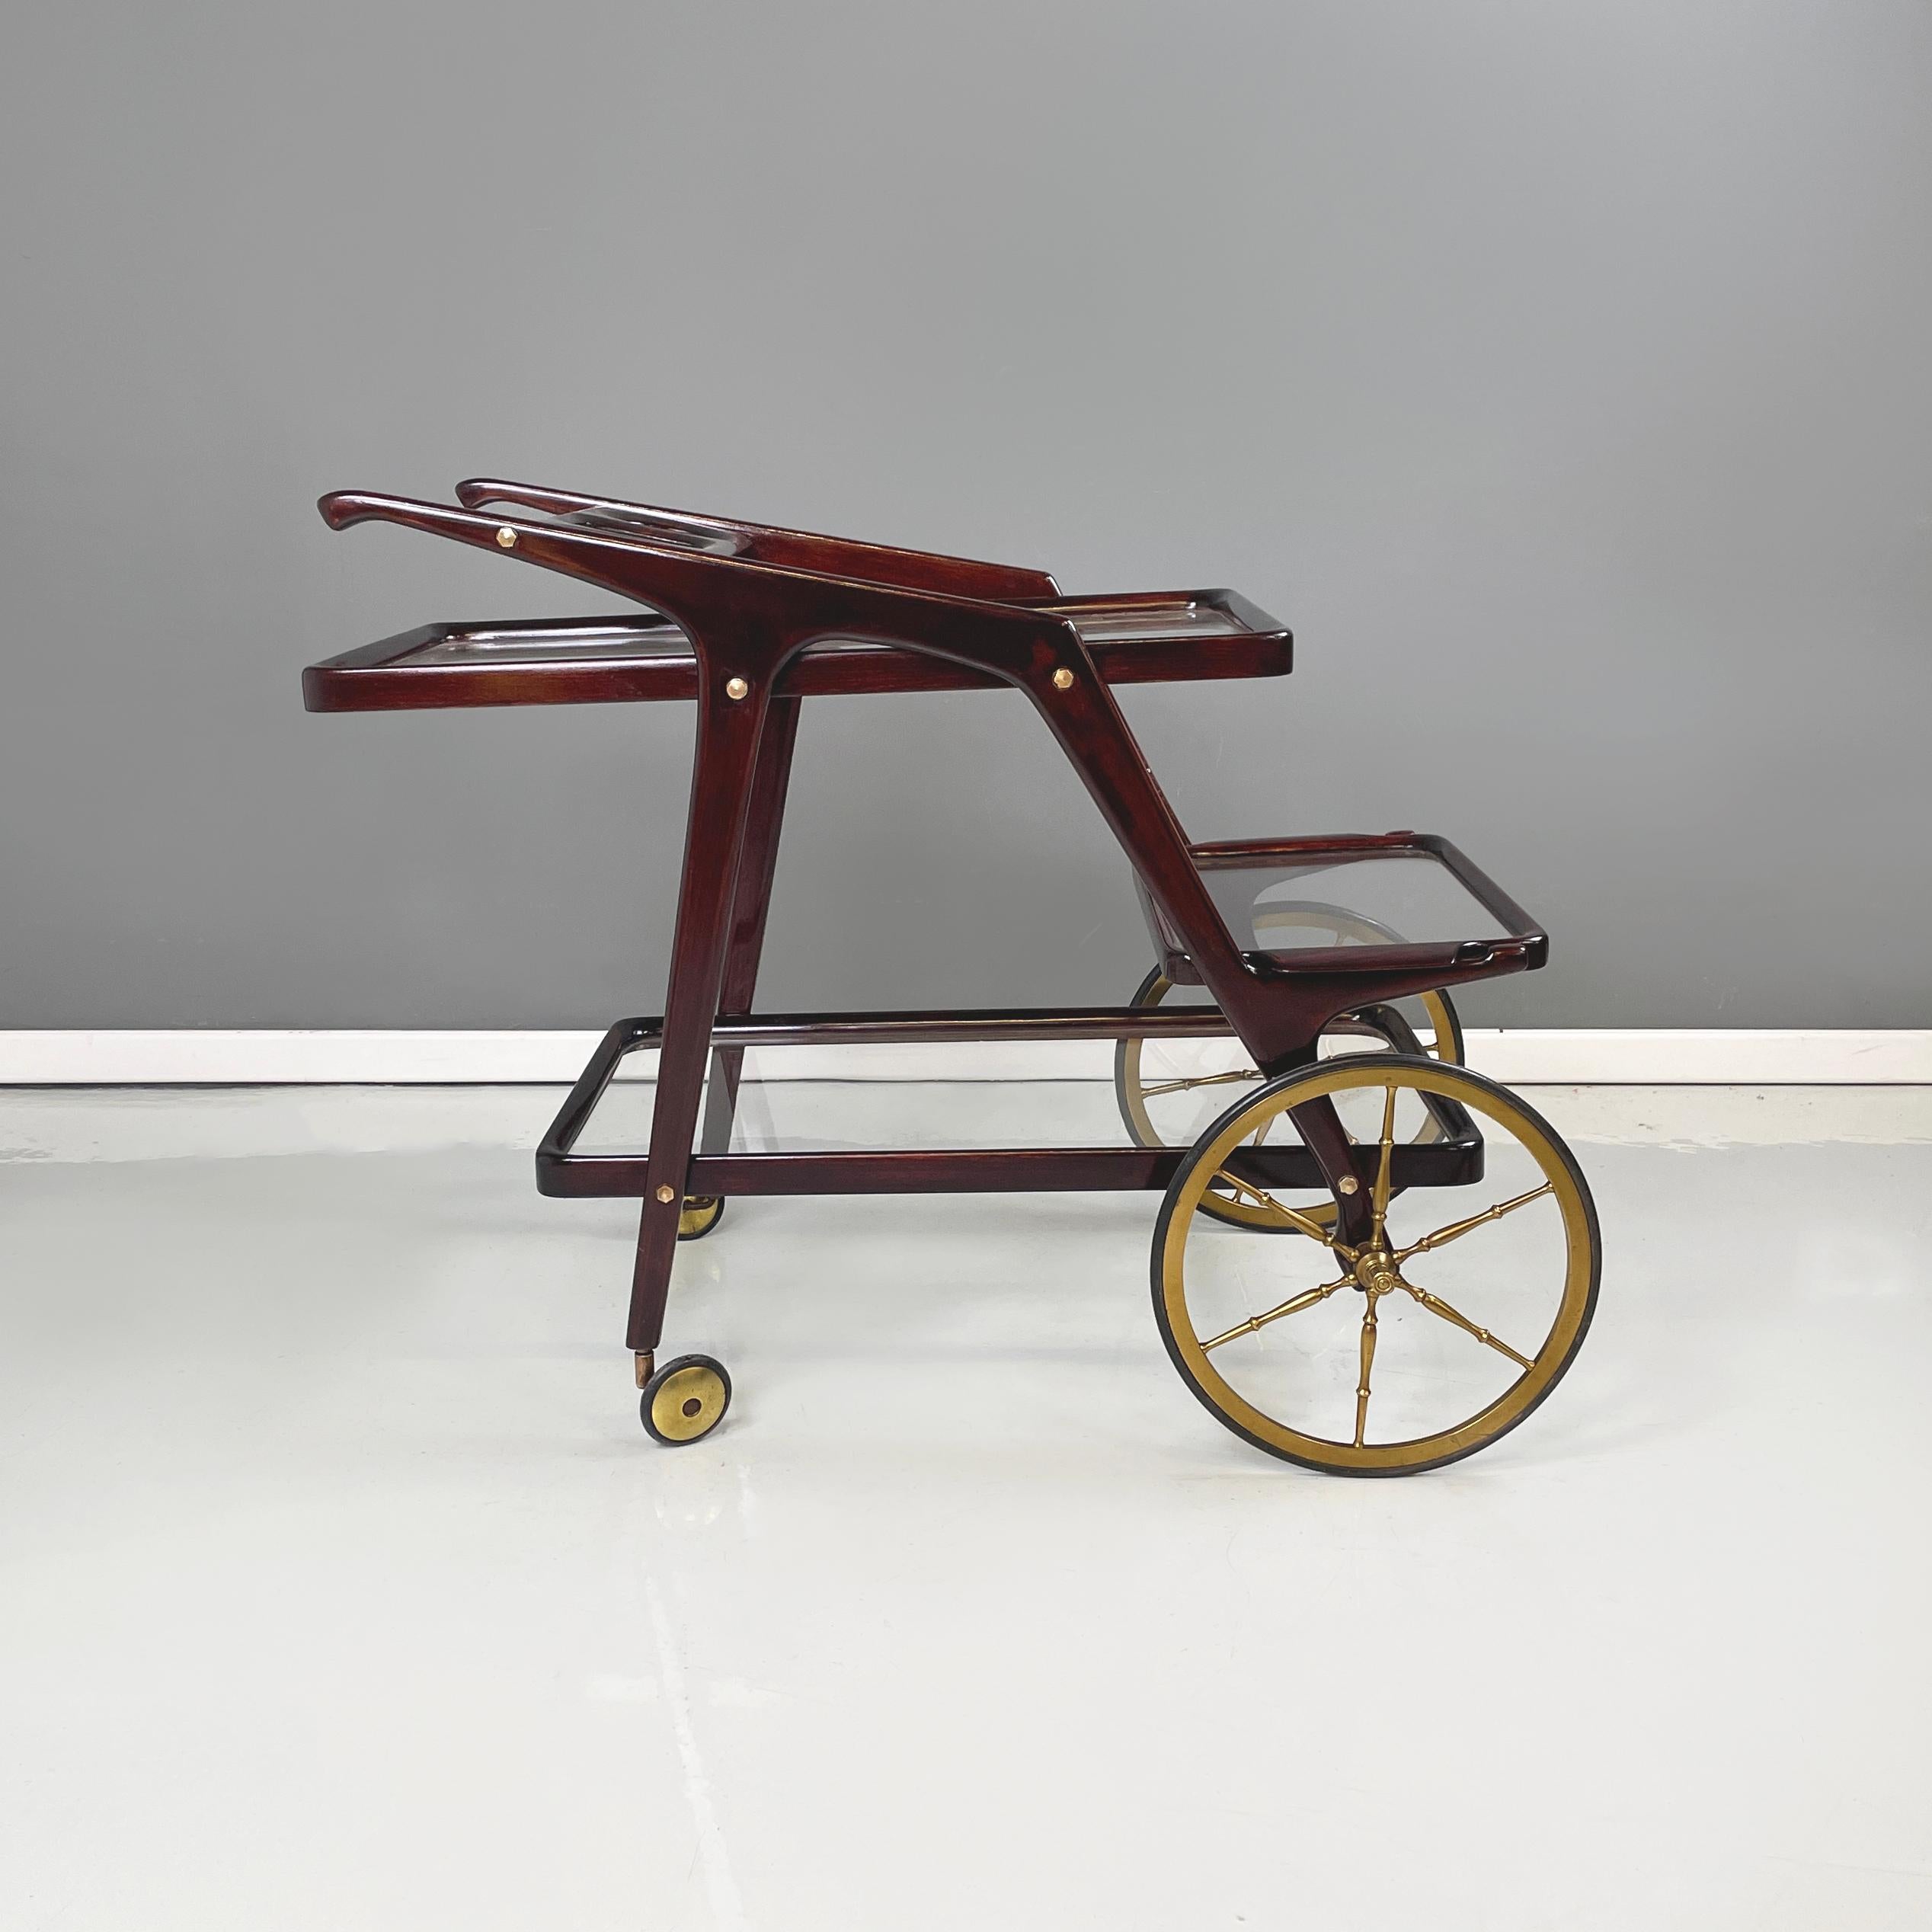 Italian mid-century modern Wooden and glass cart with tray by Cesare Lacca, 1950s
Food cart with dark wooden structure. There are two shelves and an extractable tray with handles made of glass with wooden profiles. In the upper part it has 3 holes